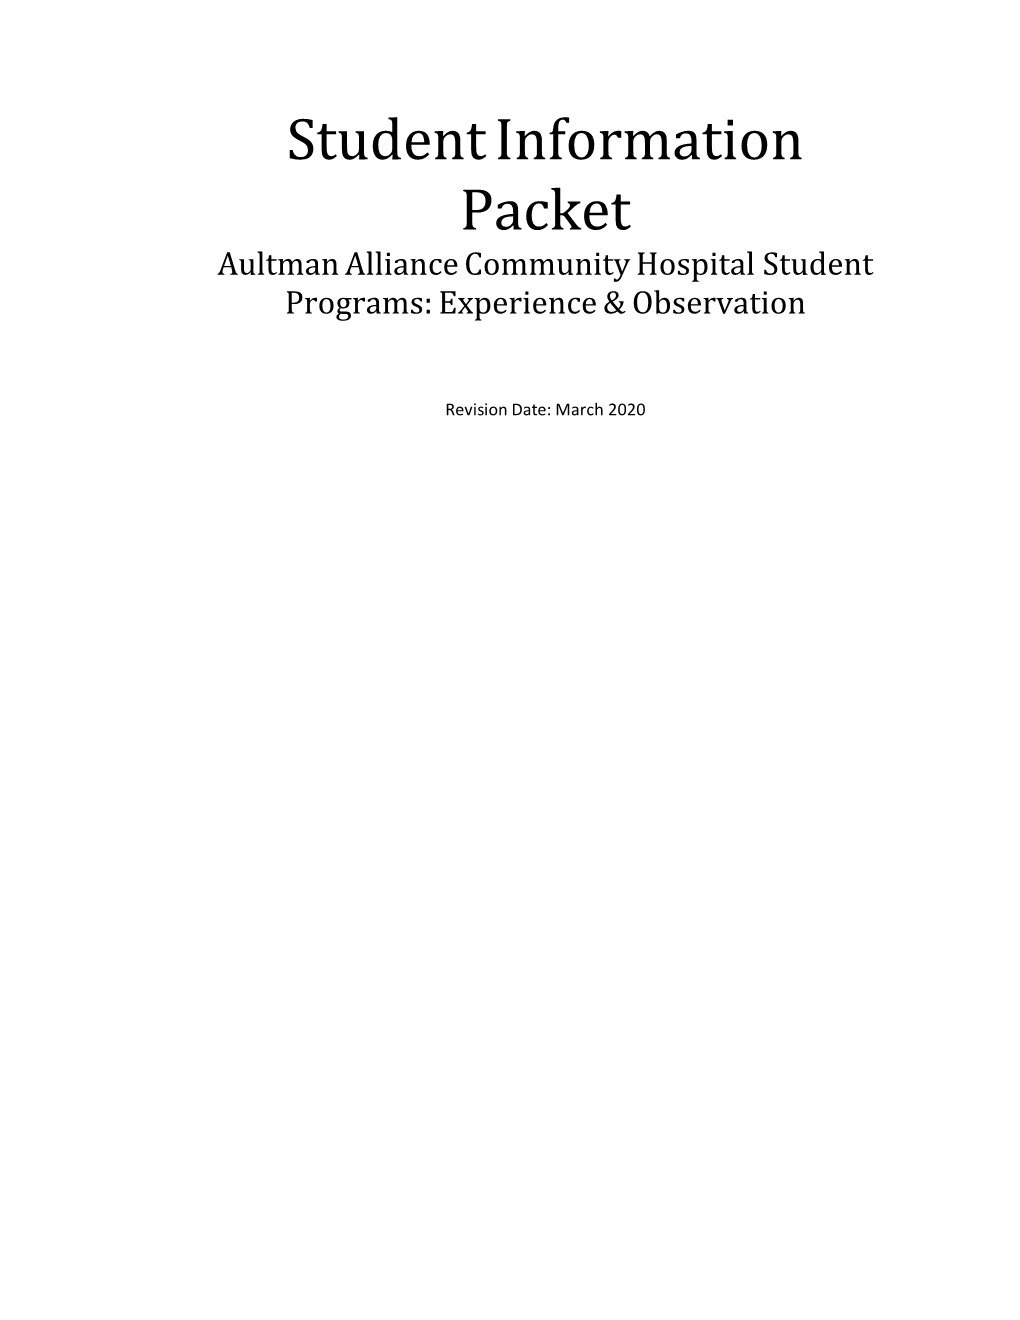 Student Information Packet Aultman Alliance Community Hospital Student Programs: Experience & Observation